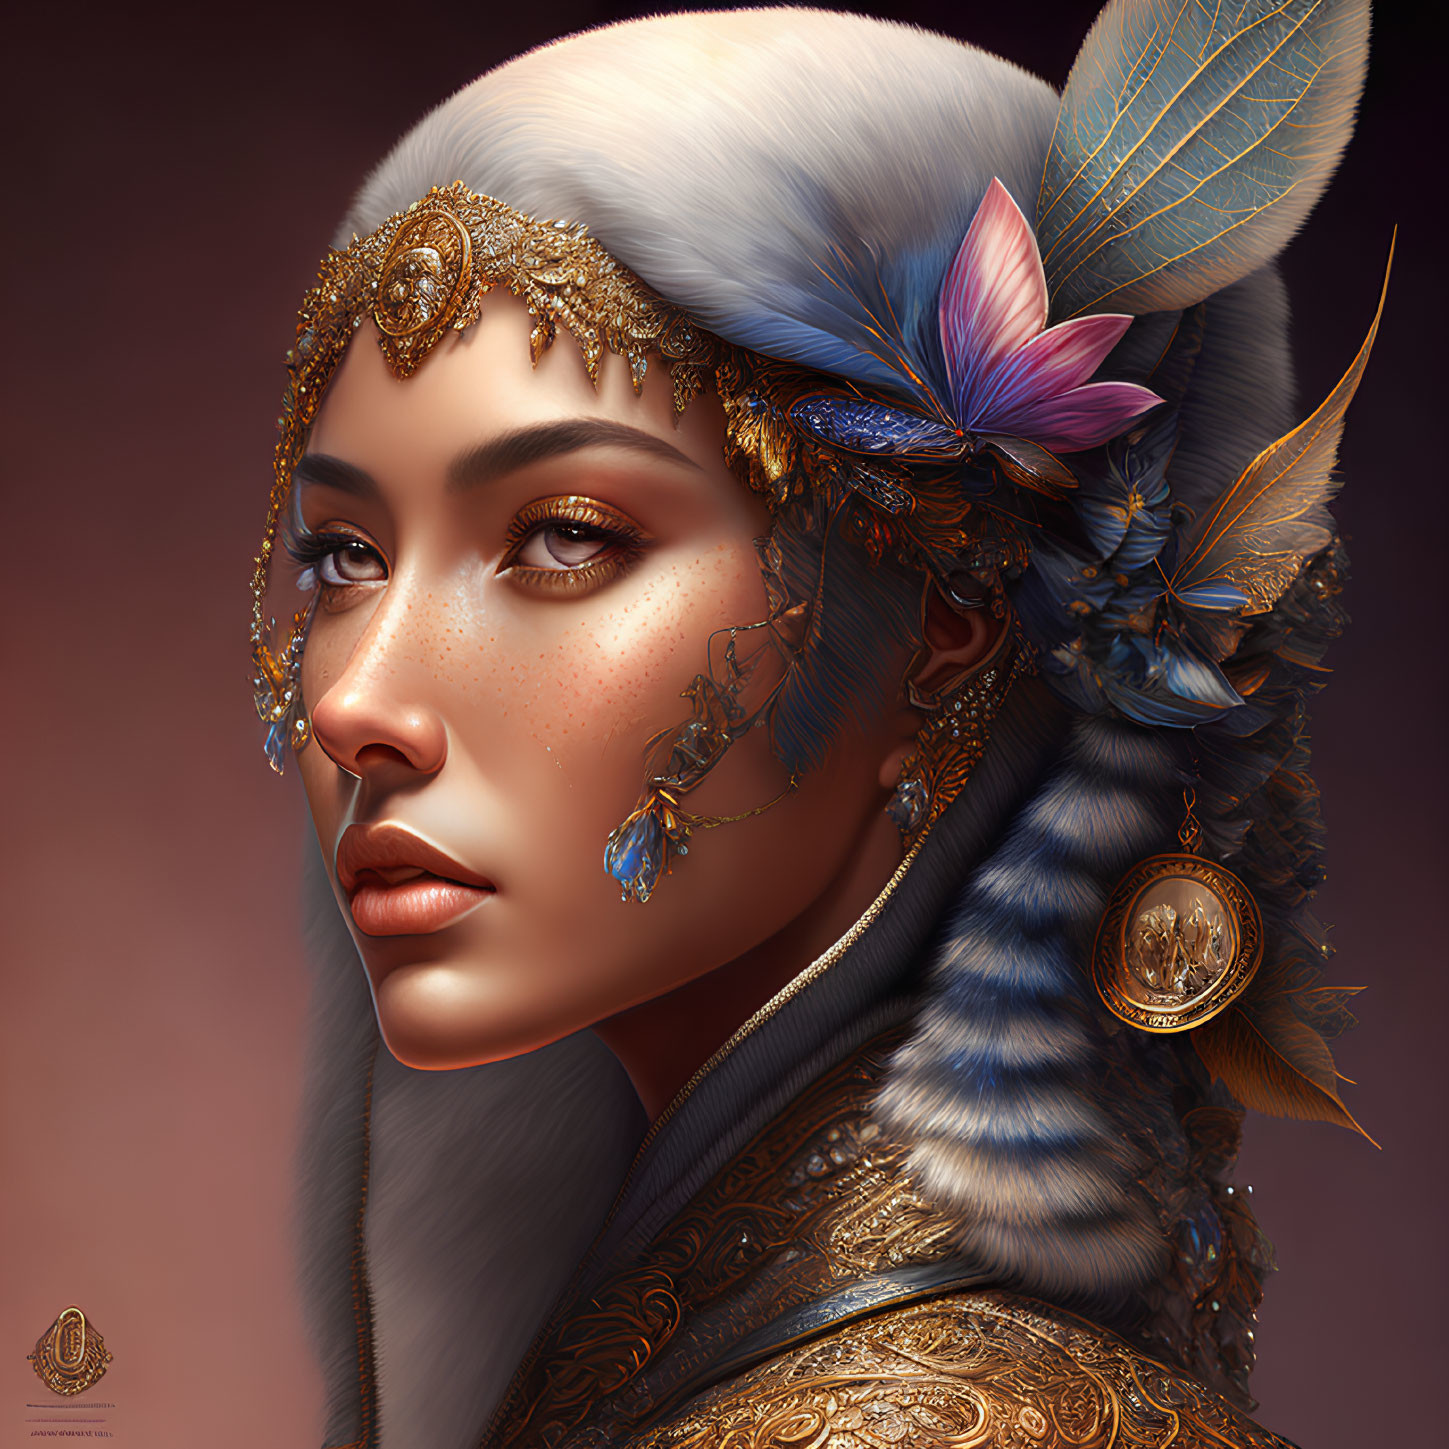 Digital portrait of woman with ornate headdress: gold accents, feathers, jewels. Elegance